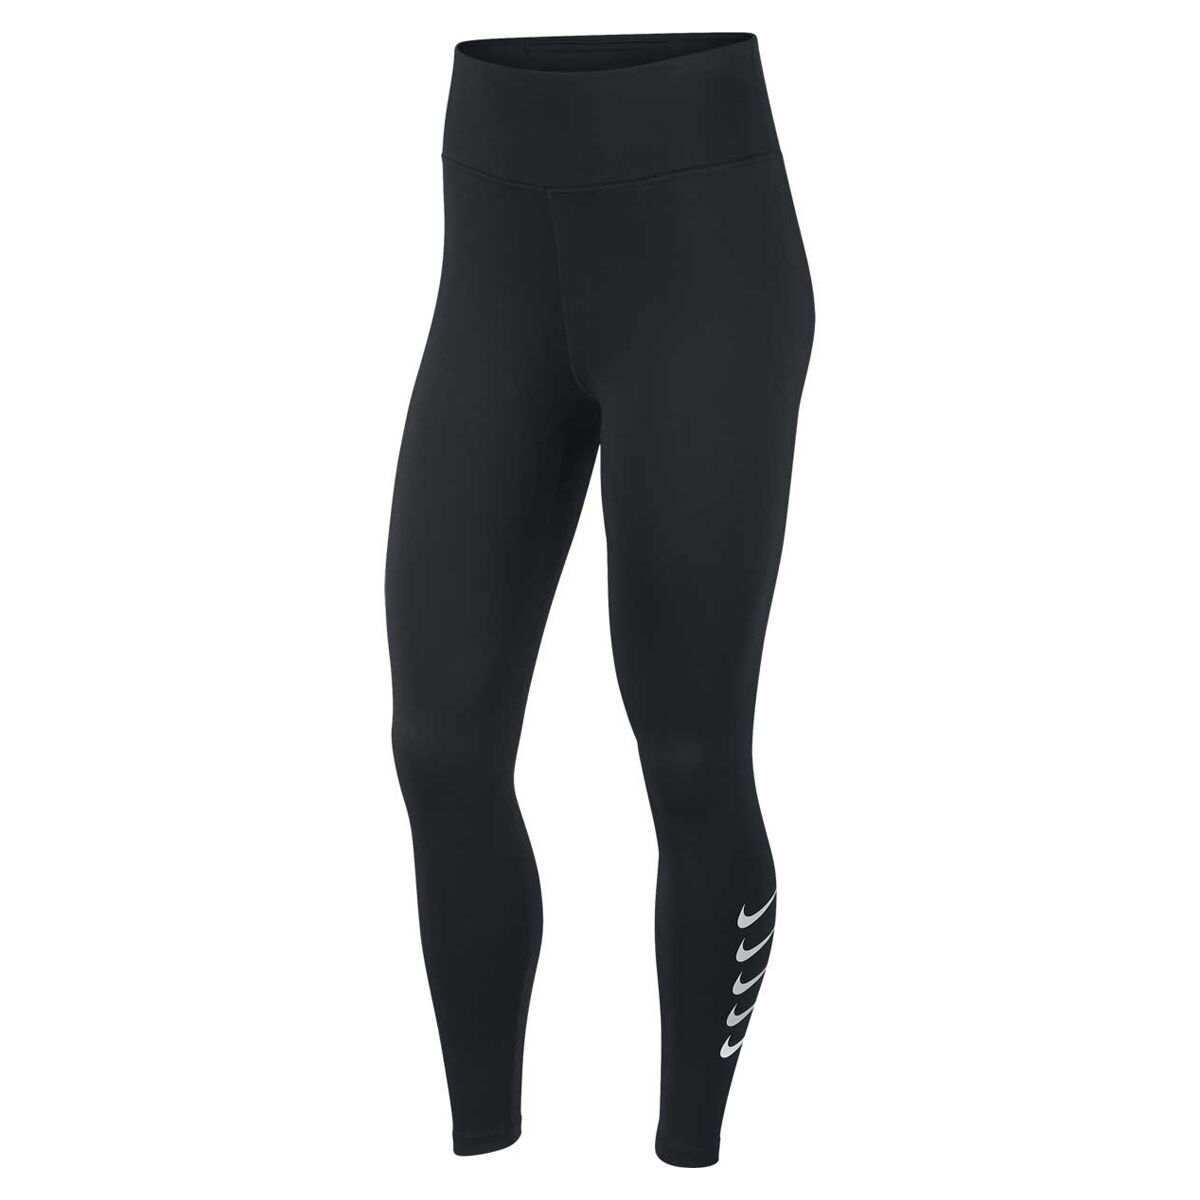 Nike Women's Compression Clothing 